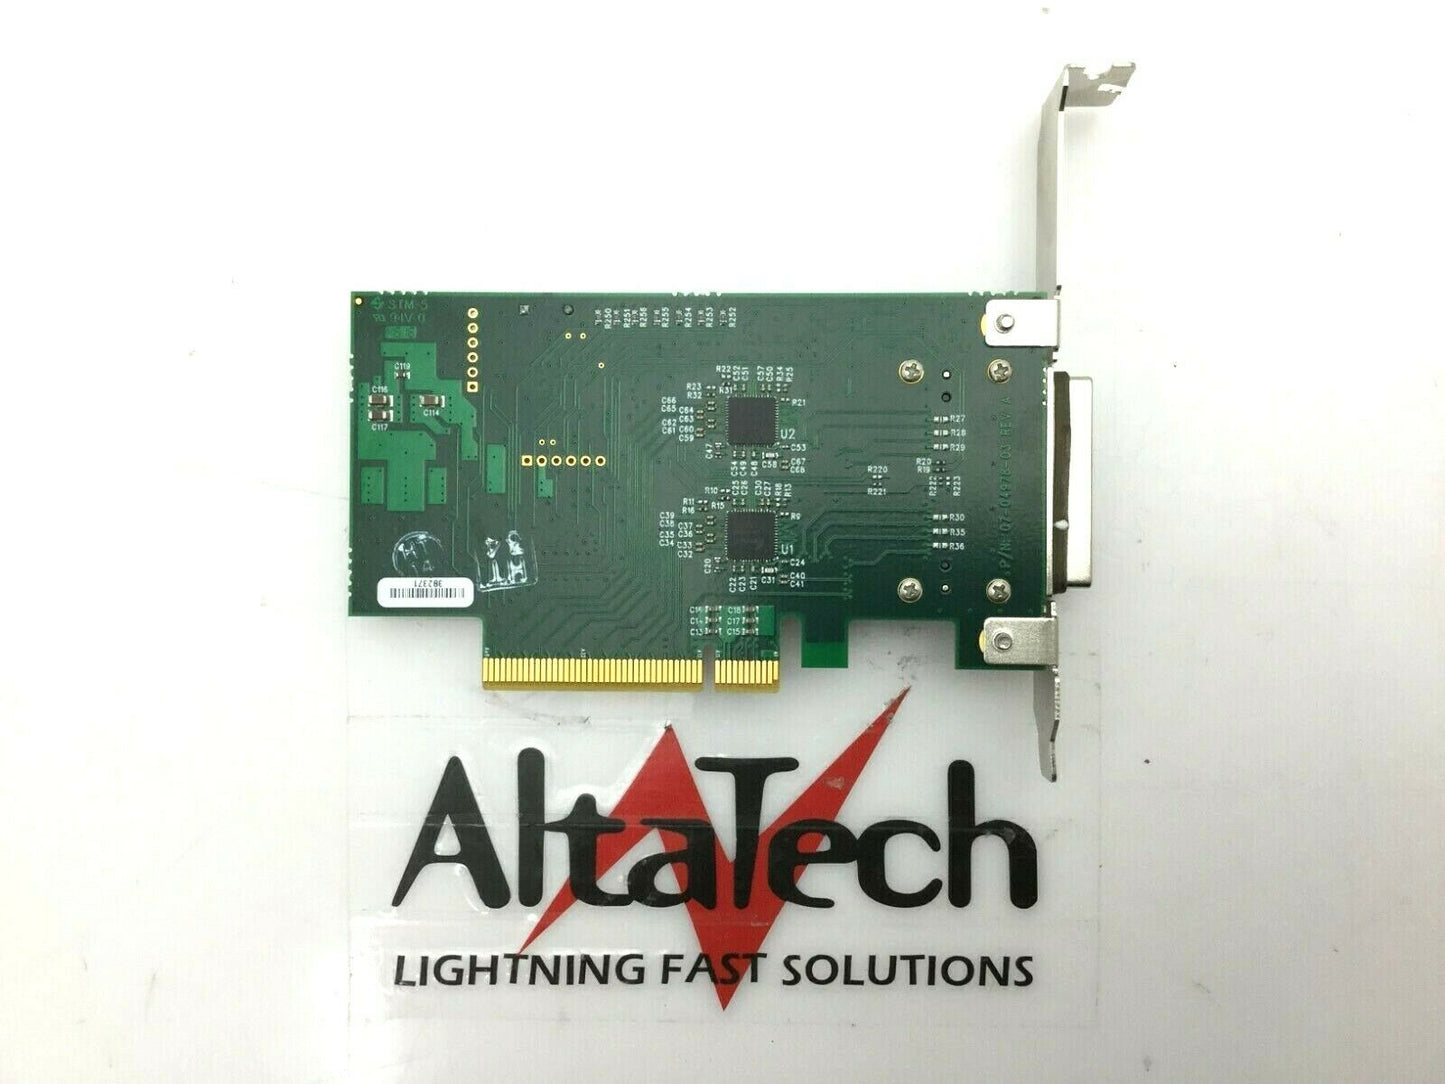 OEM 03-04978-03 Full Height PCI-e x8 Gen 2 SCSI Expansion Link Card, Used